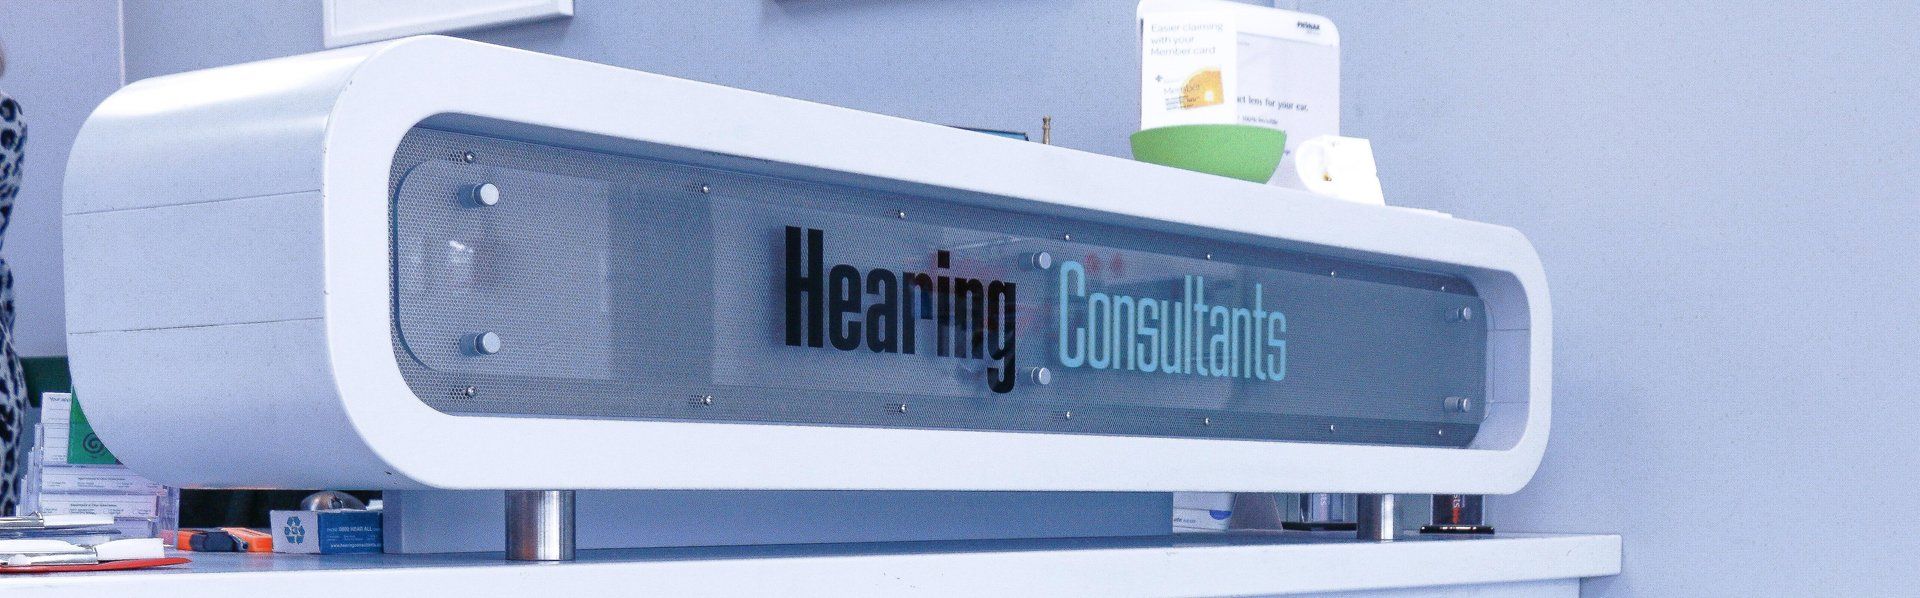 About Hearing Consultants